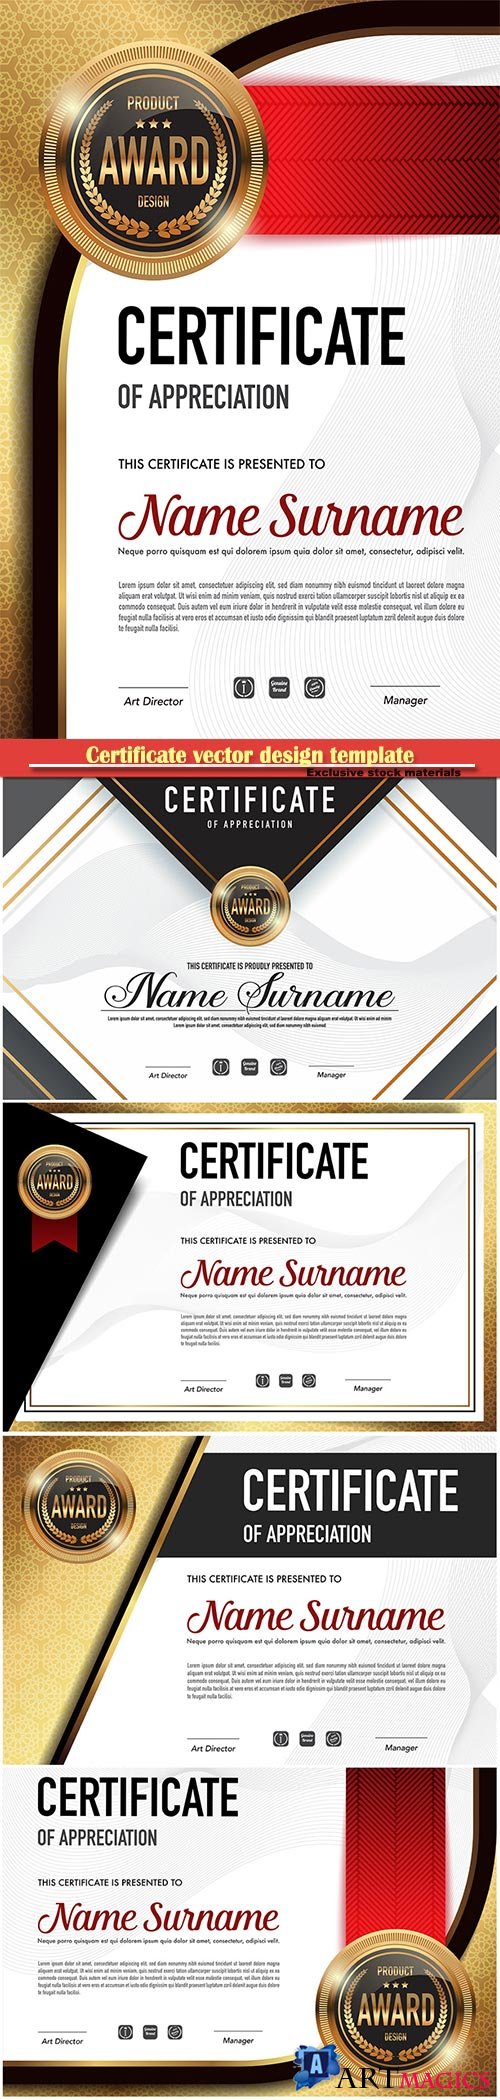 Certificate and vector diploma design template # 72